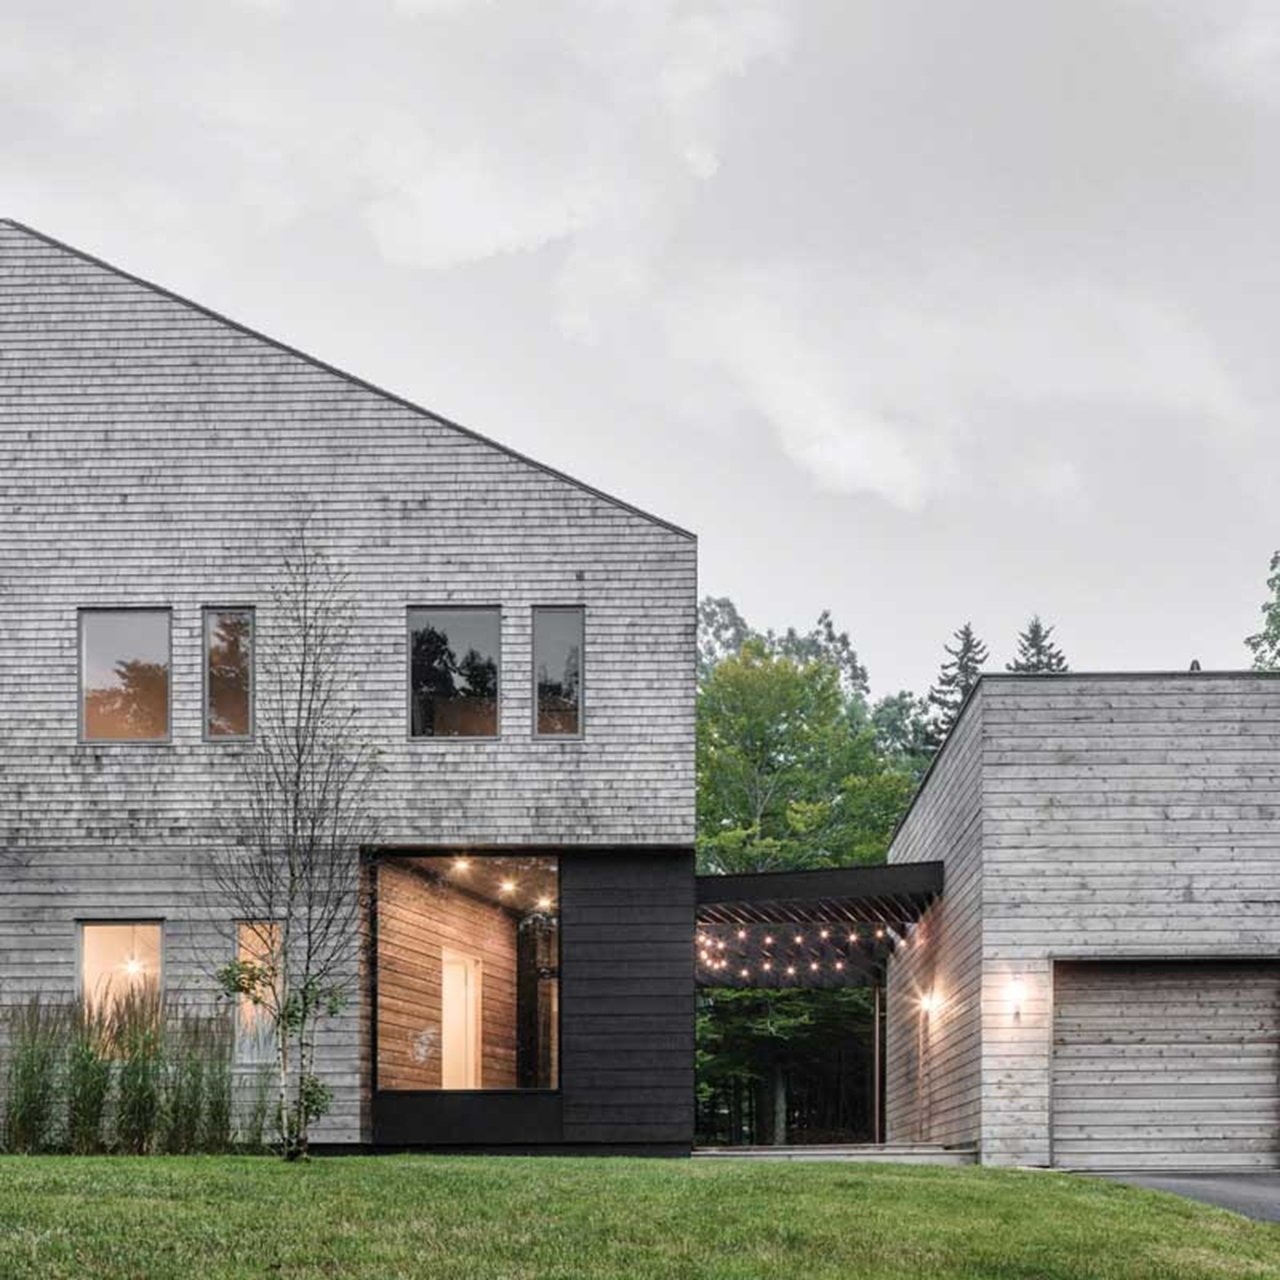 Polygon shaped home with grey wood siding and marvin windows